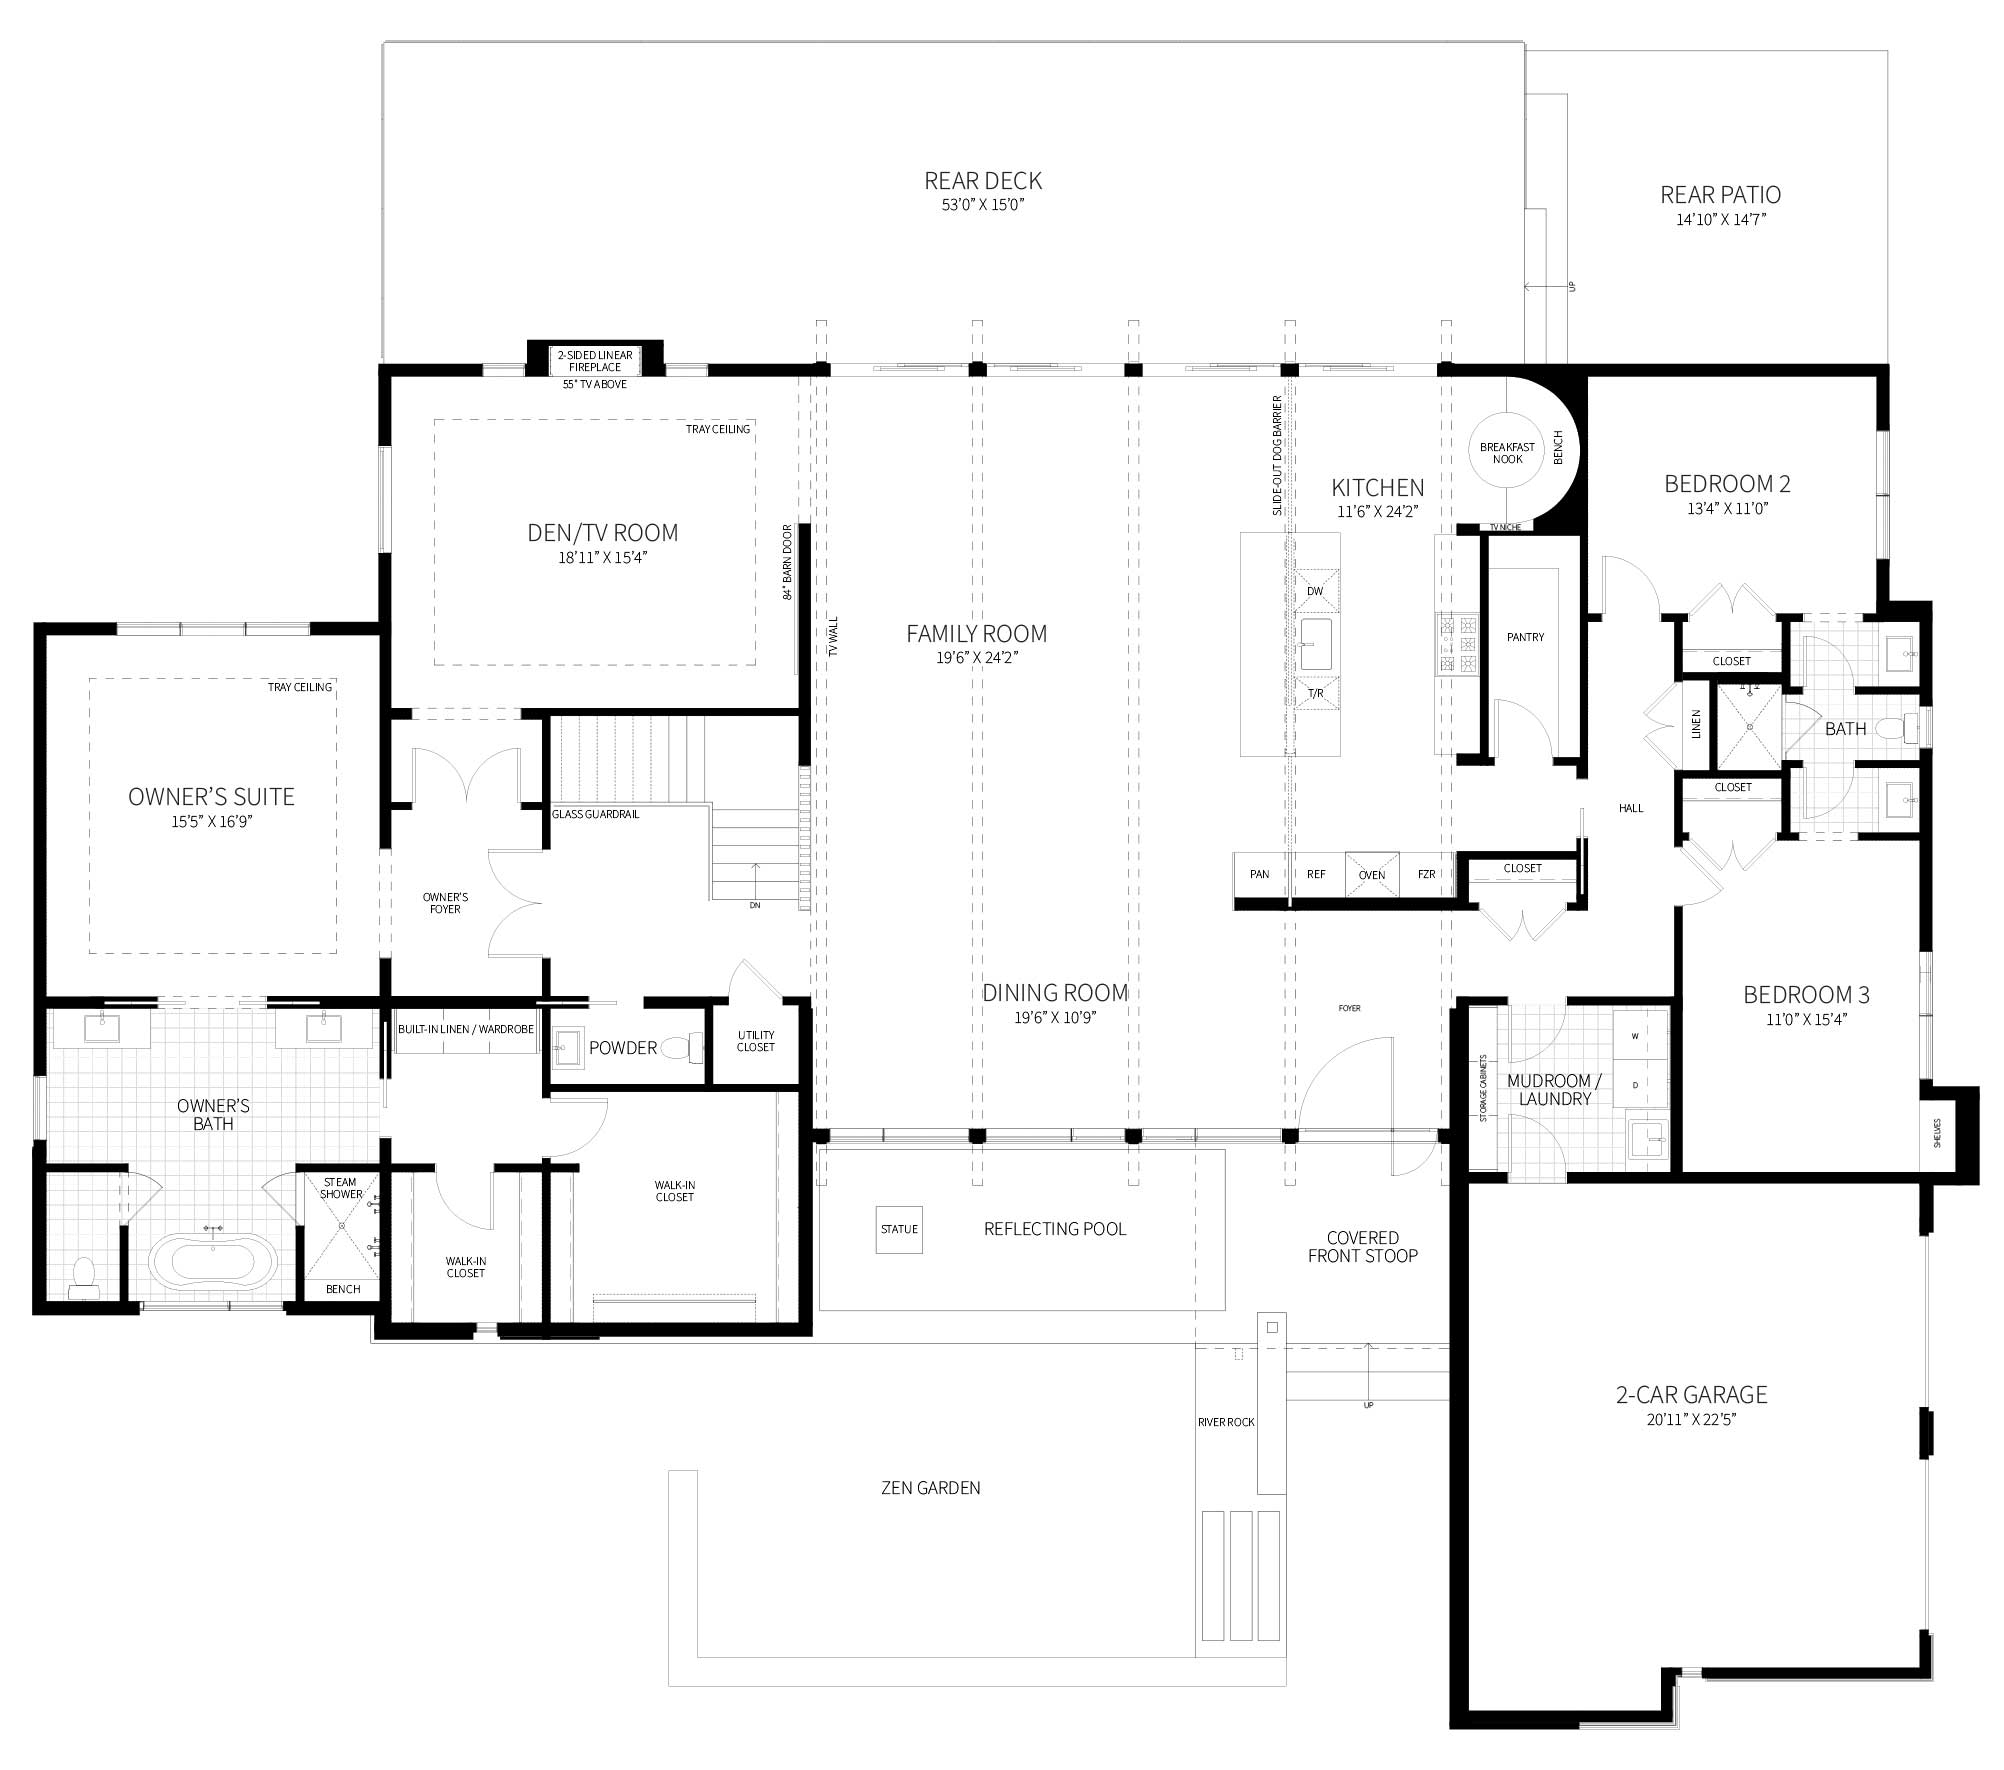 The first floor plan of a one-level california modern inspired custom home.